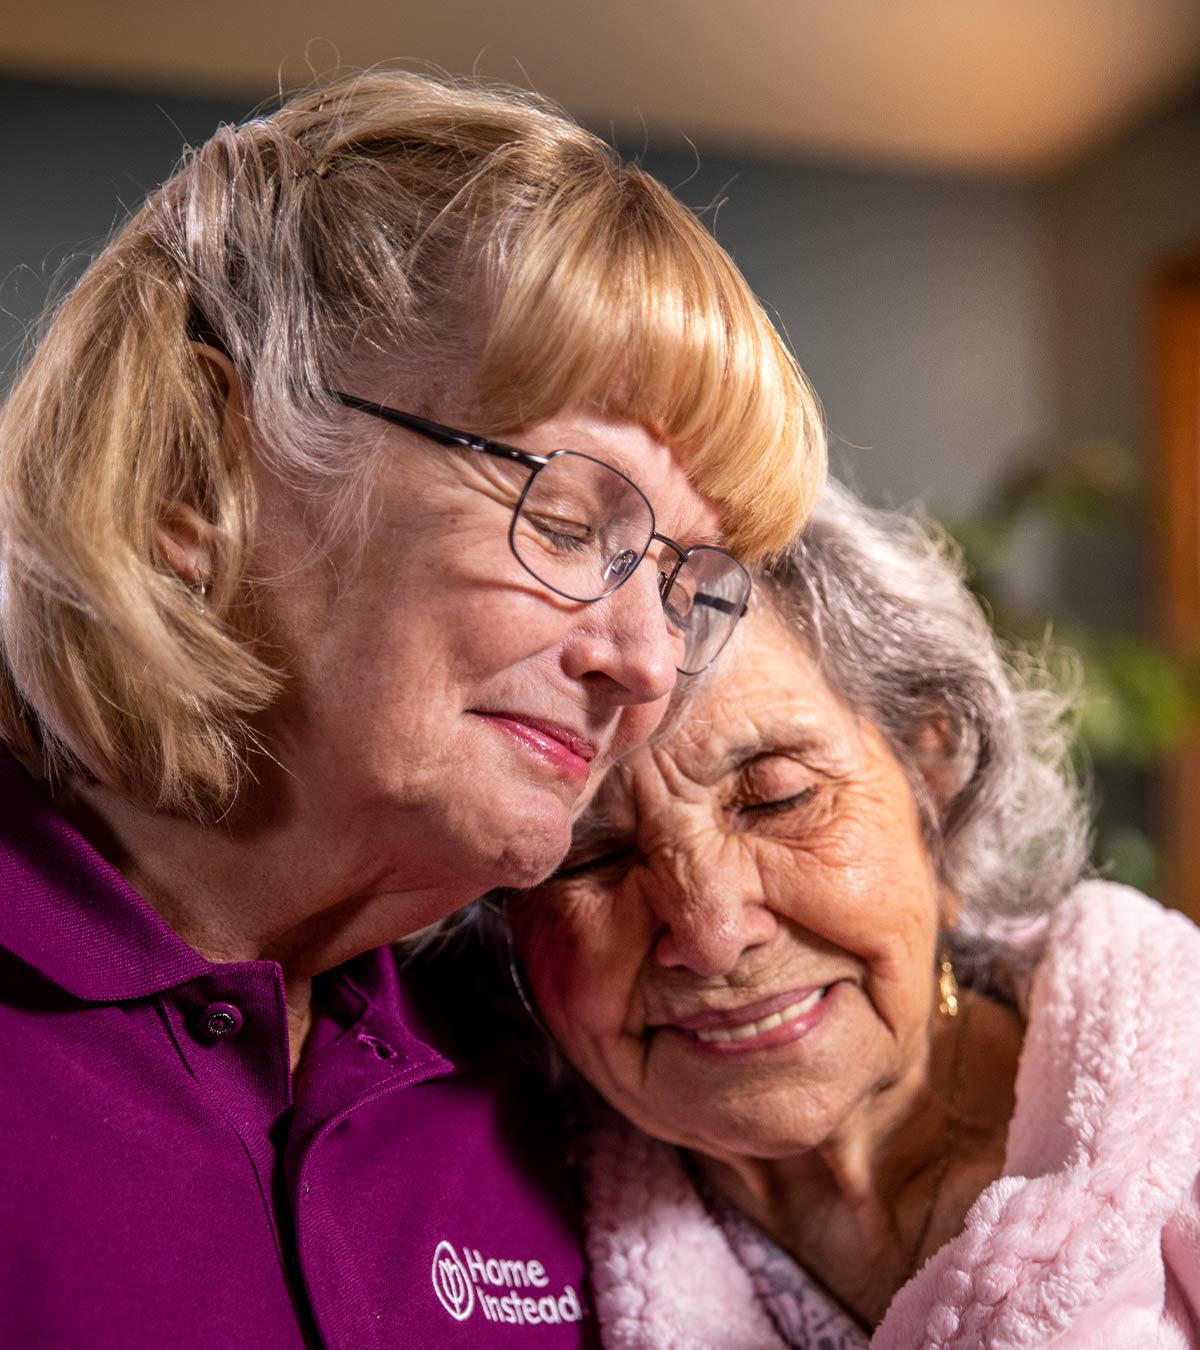 CAREGiver providing in-home senior care services. Home Instead of Tyler, TX provides Elder Care to aging adults. 